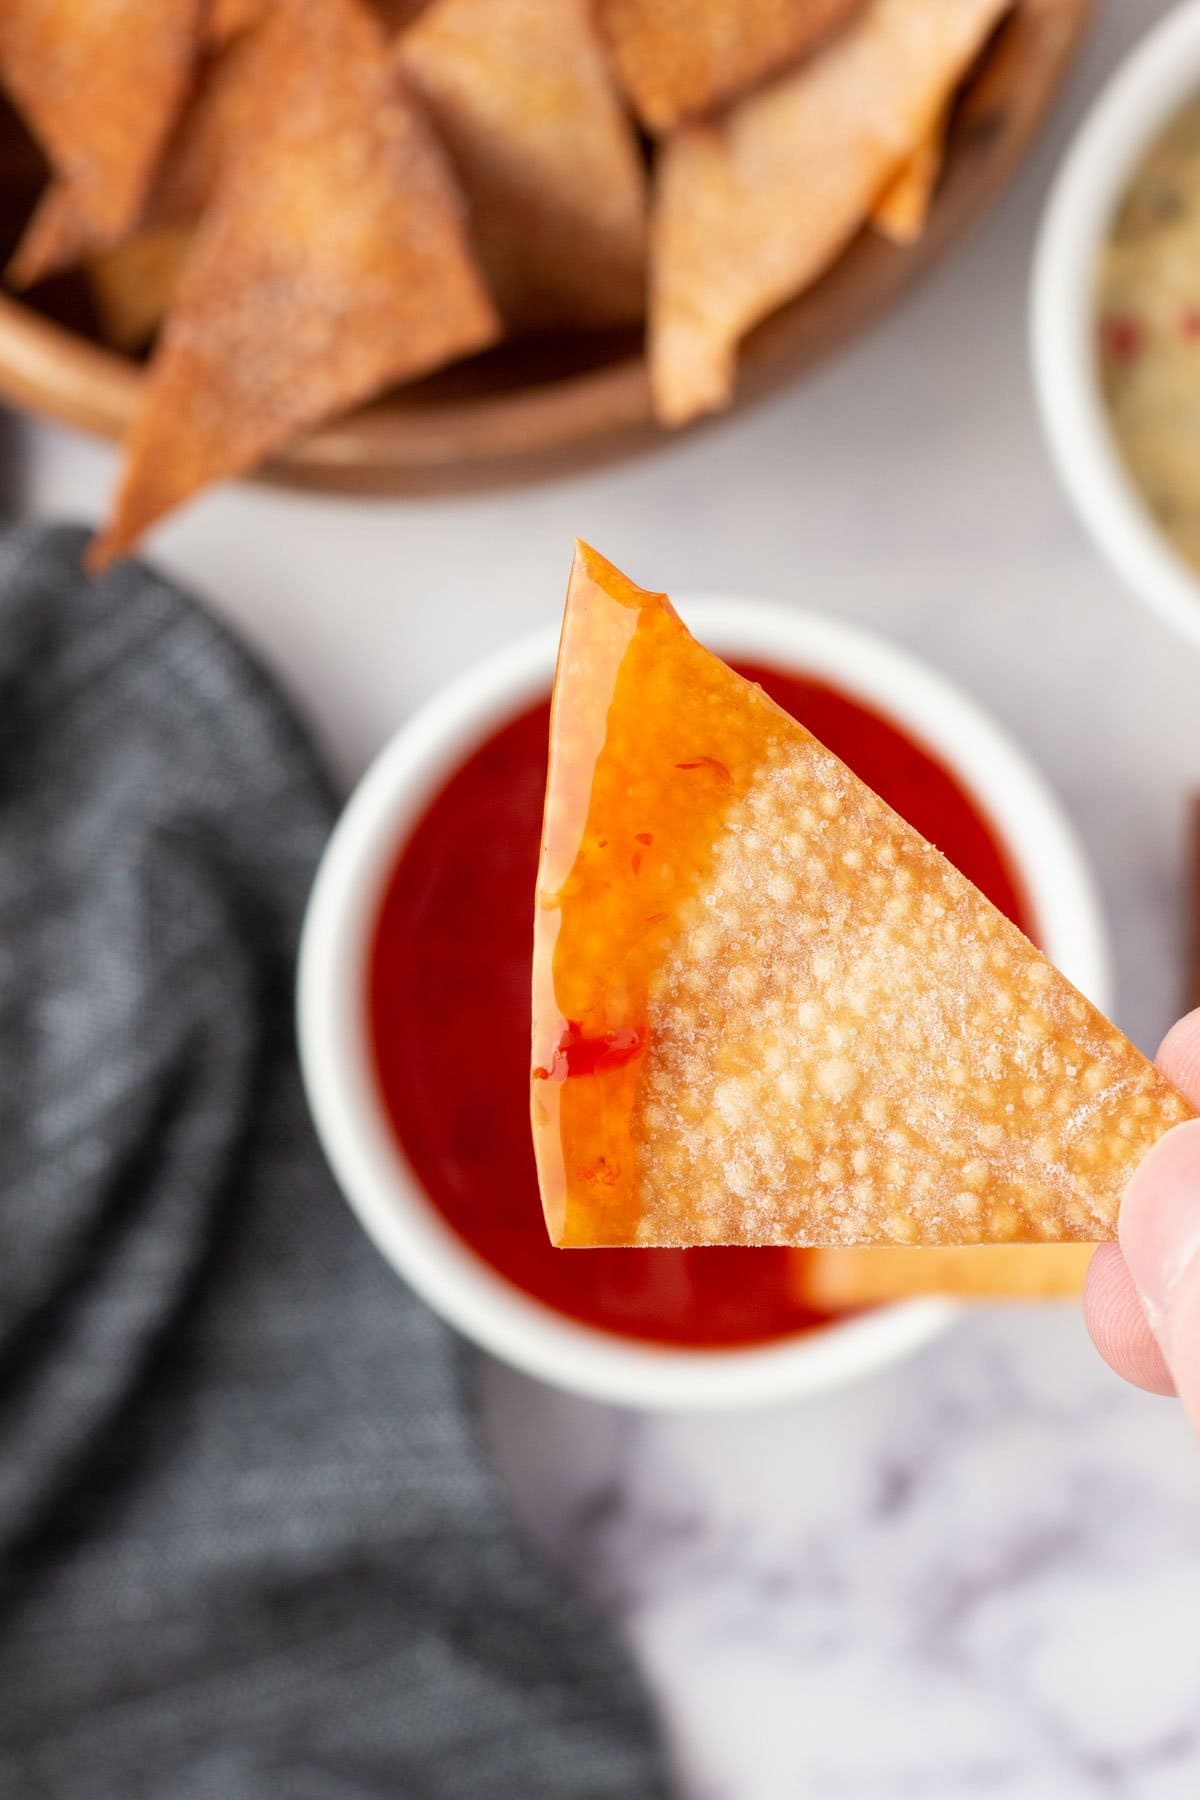 A hand holding a wonton chip over red sauce.